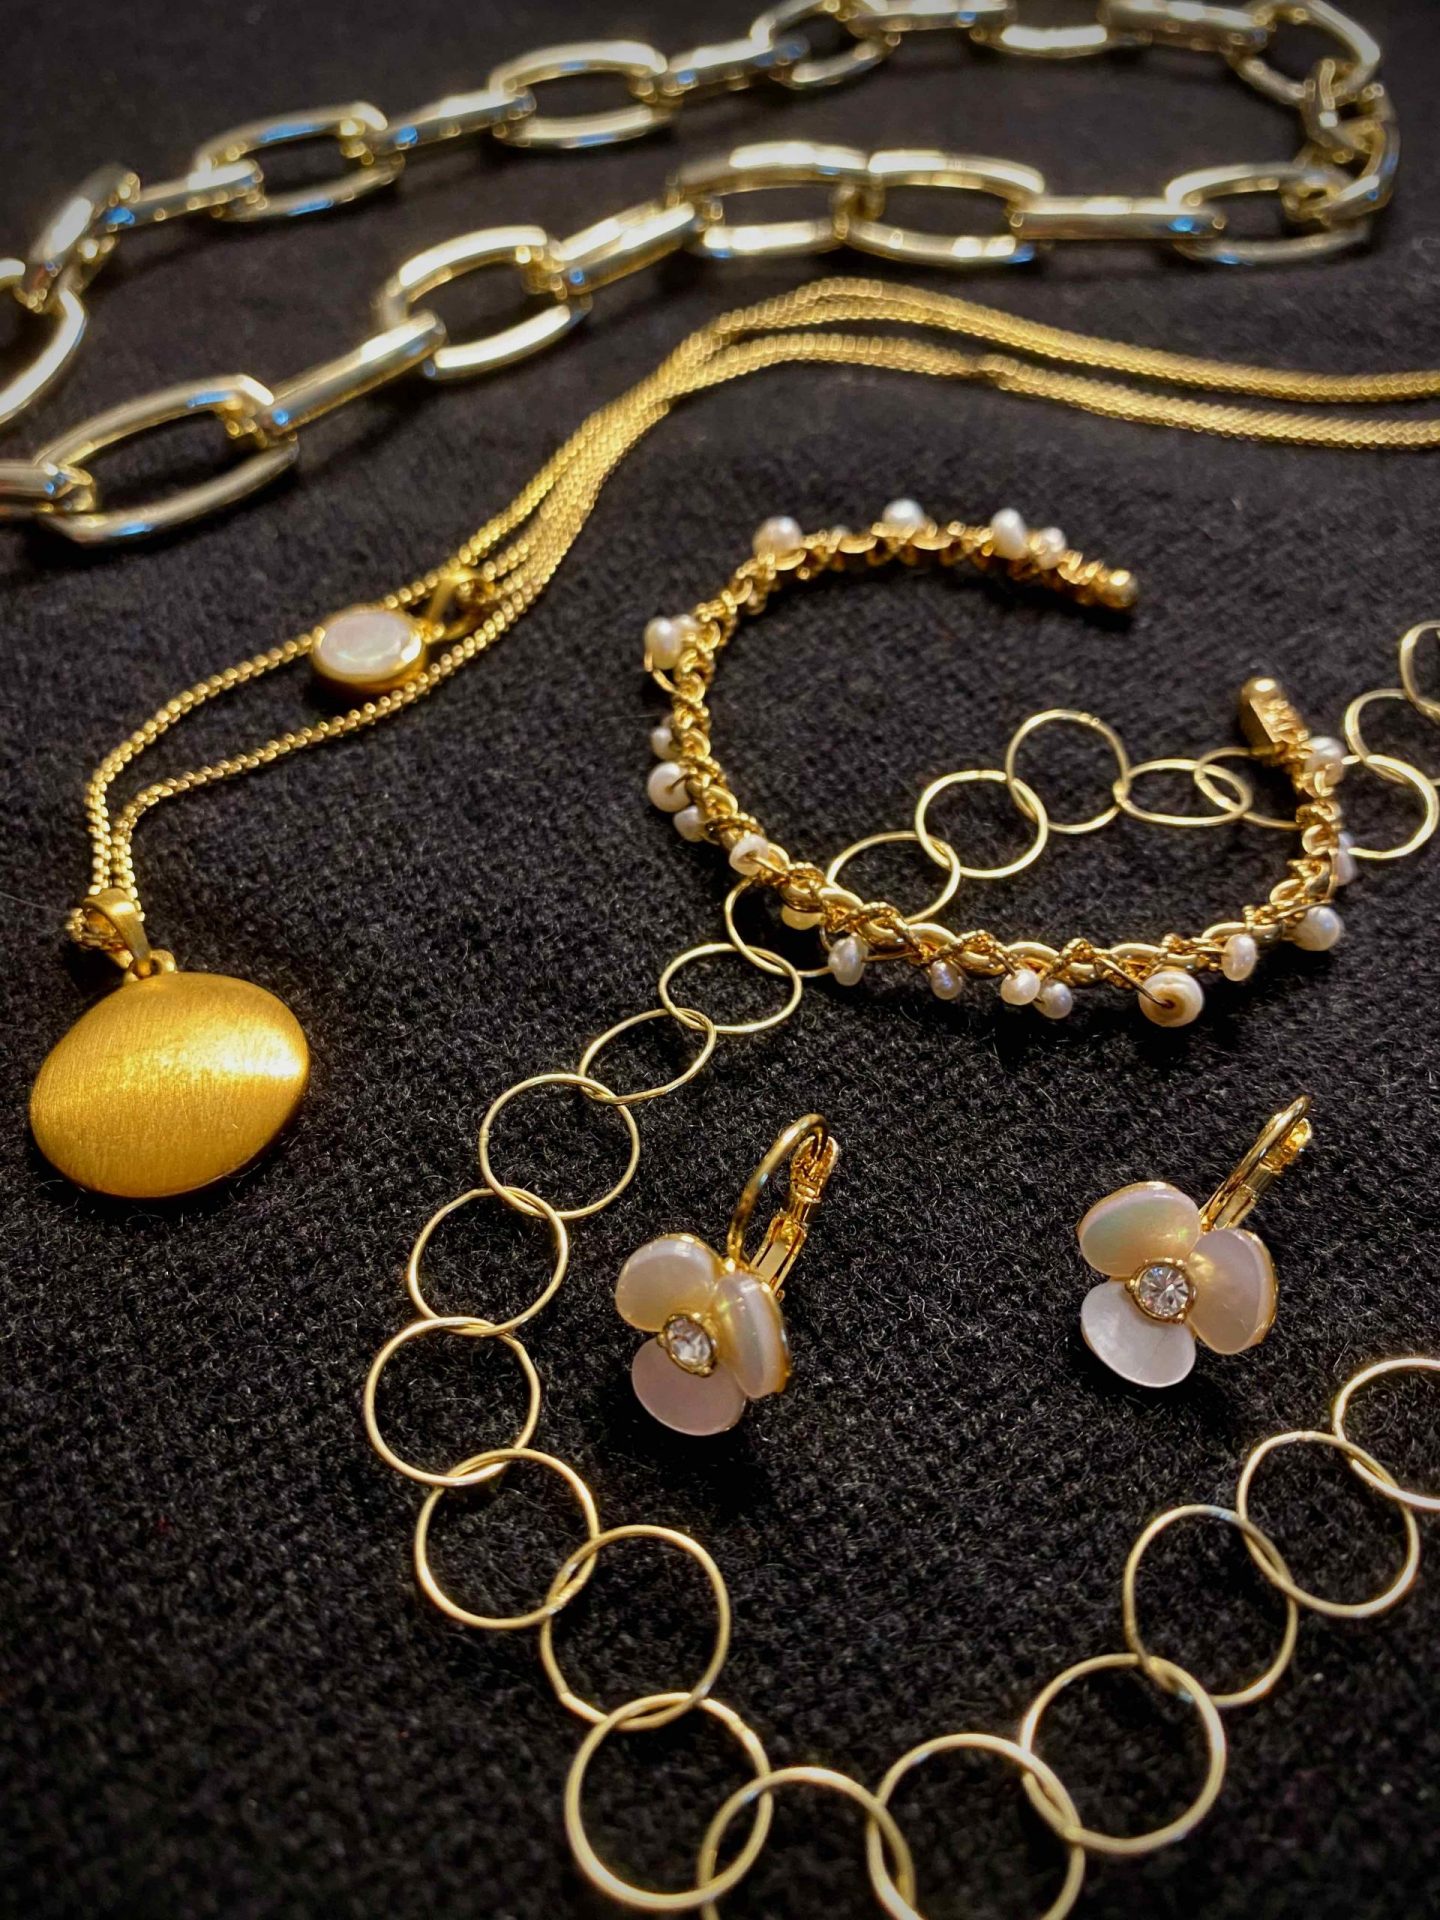 Gold Jewelry | The Spectacular Adventurer